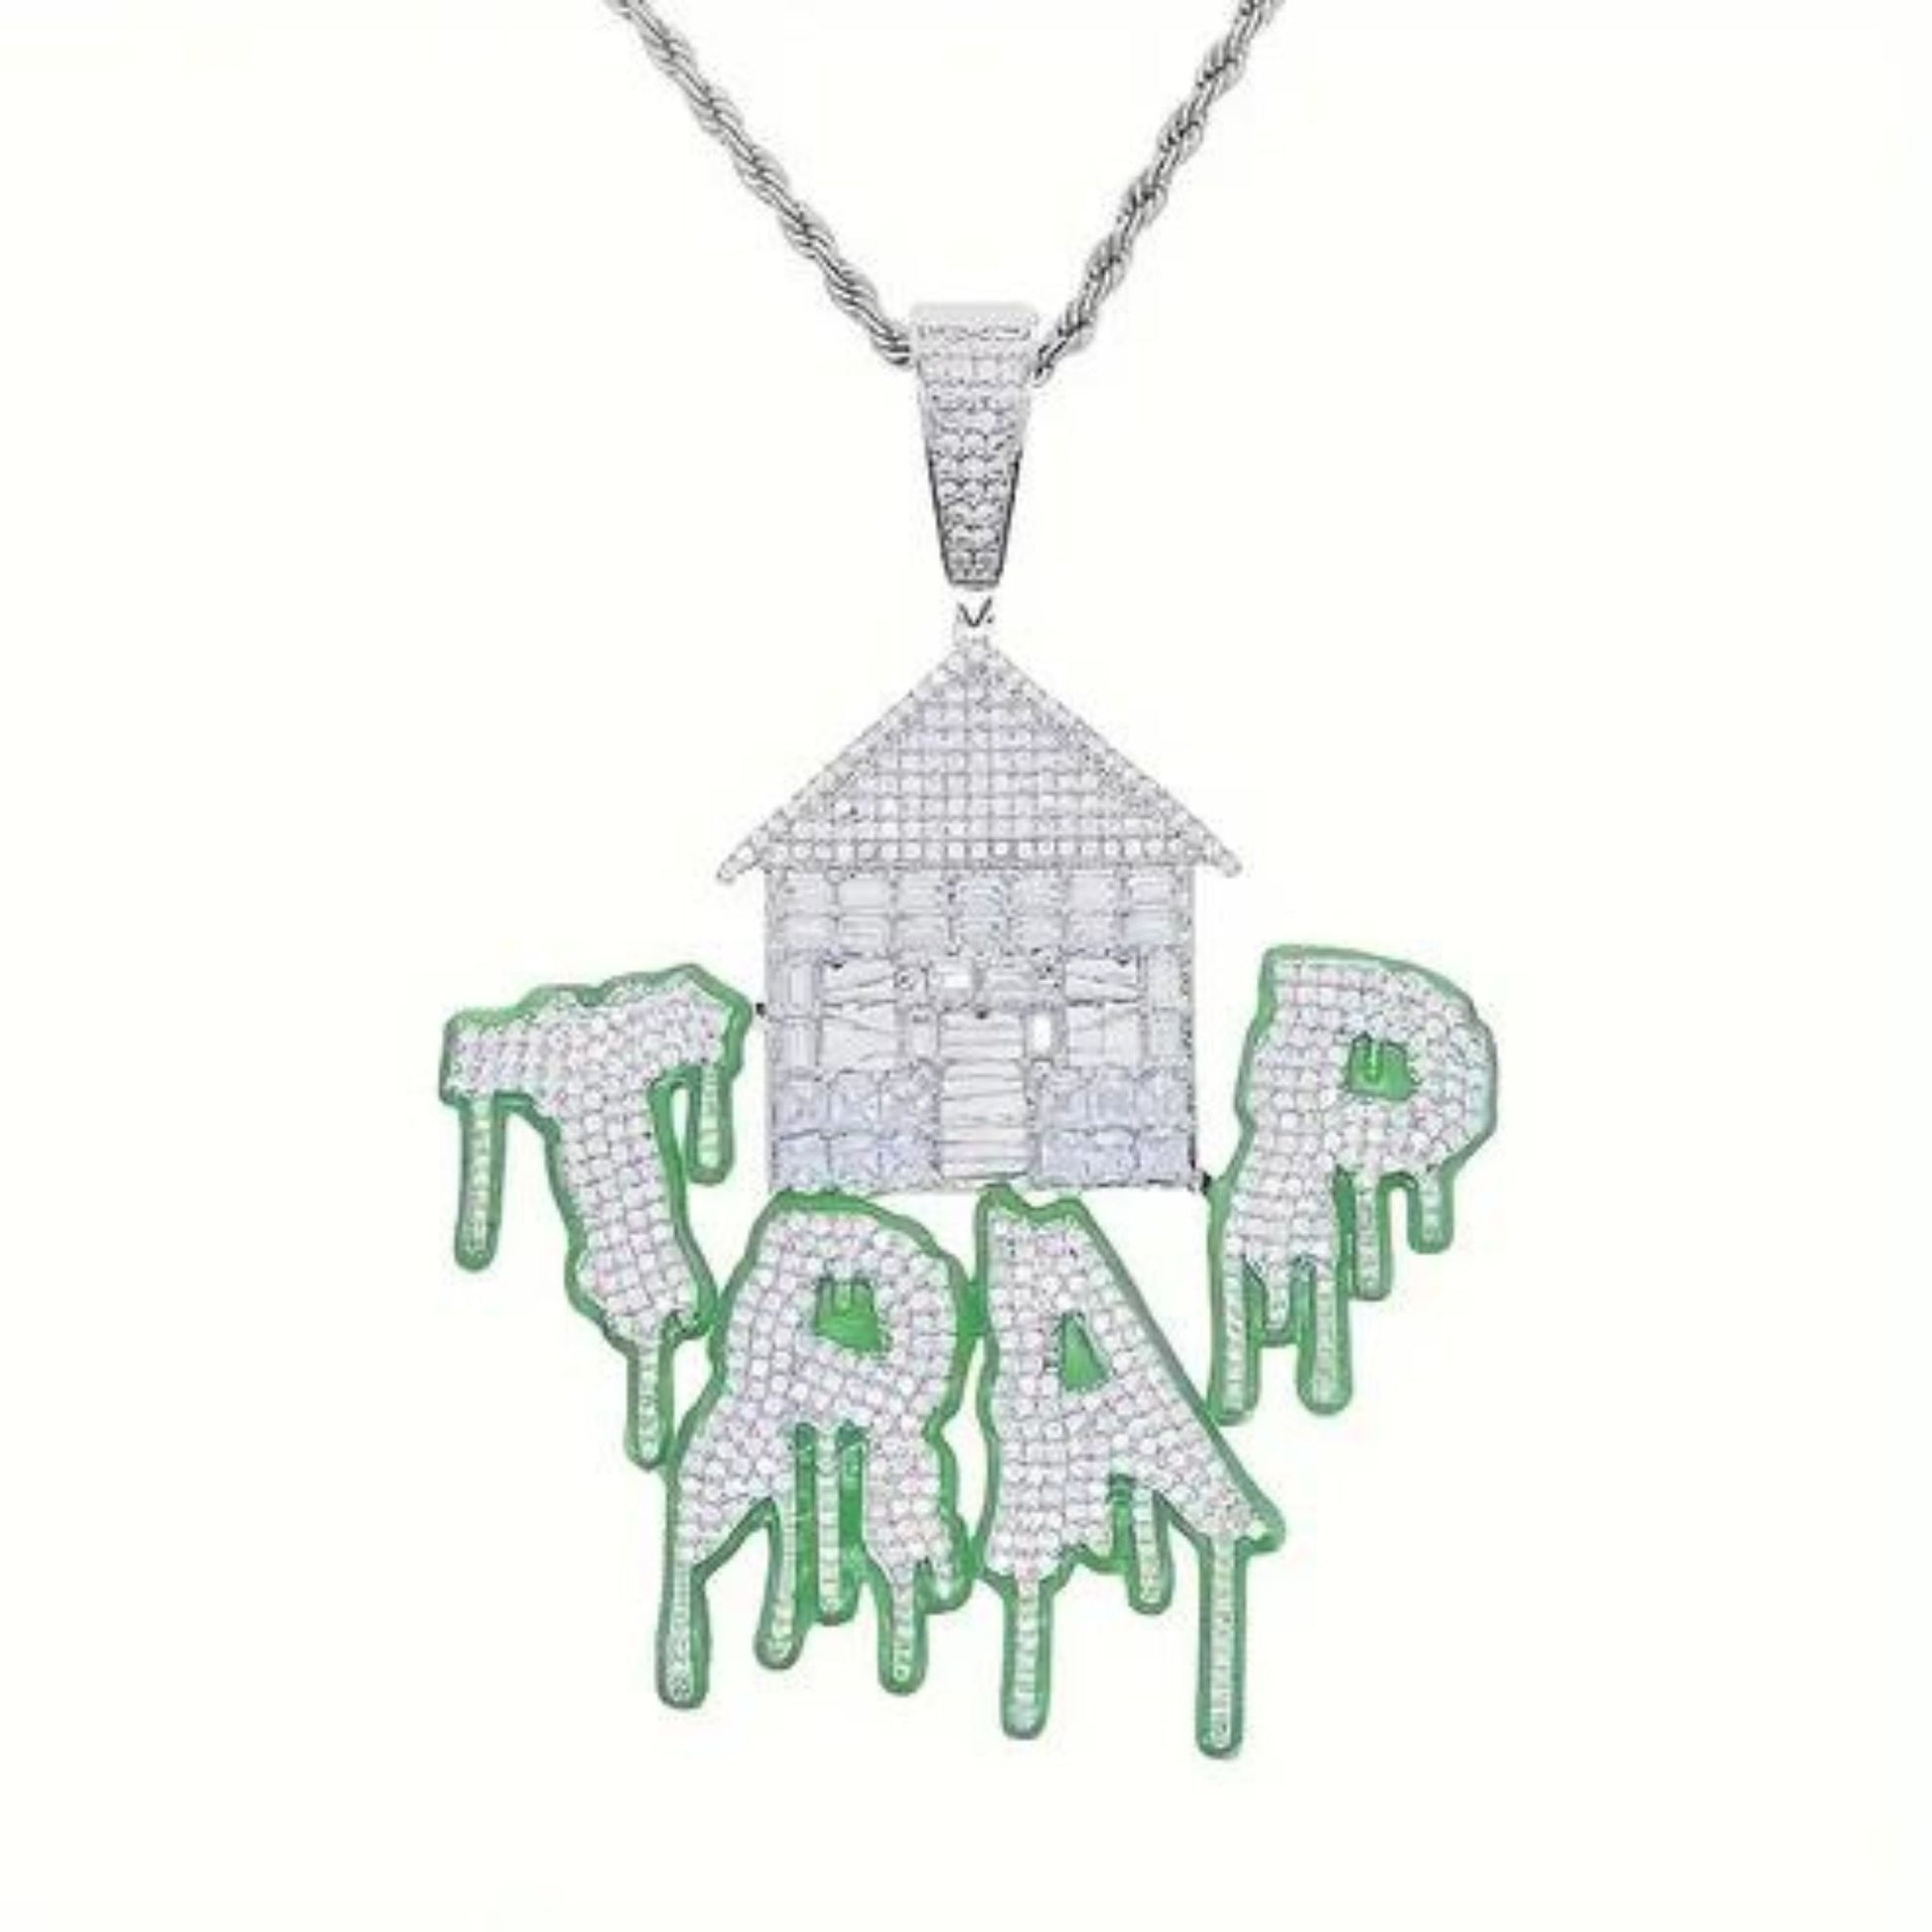 a necklace with a house and dripping paint